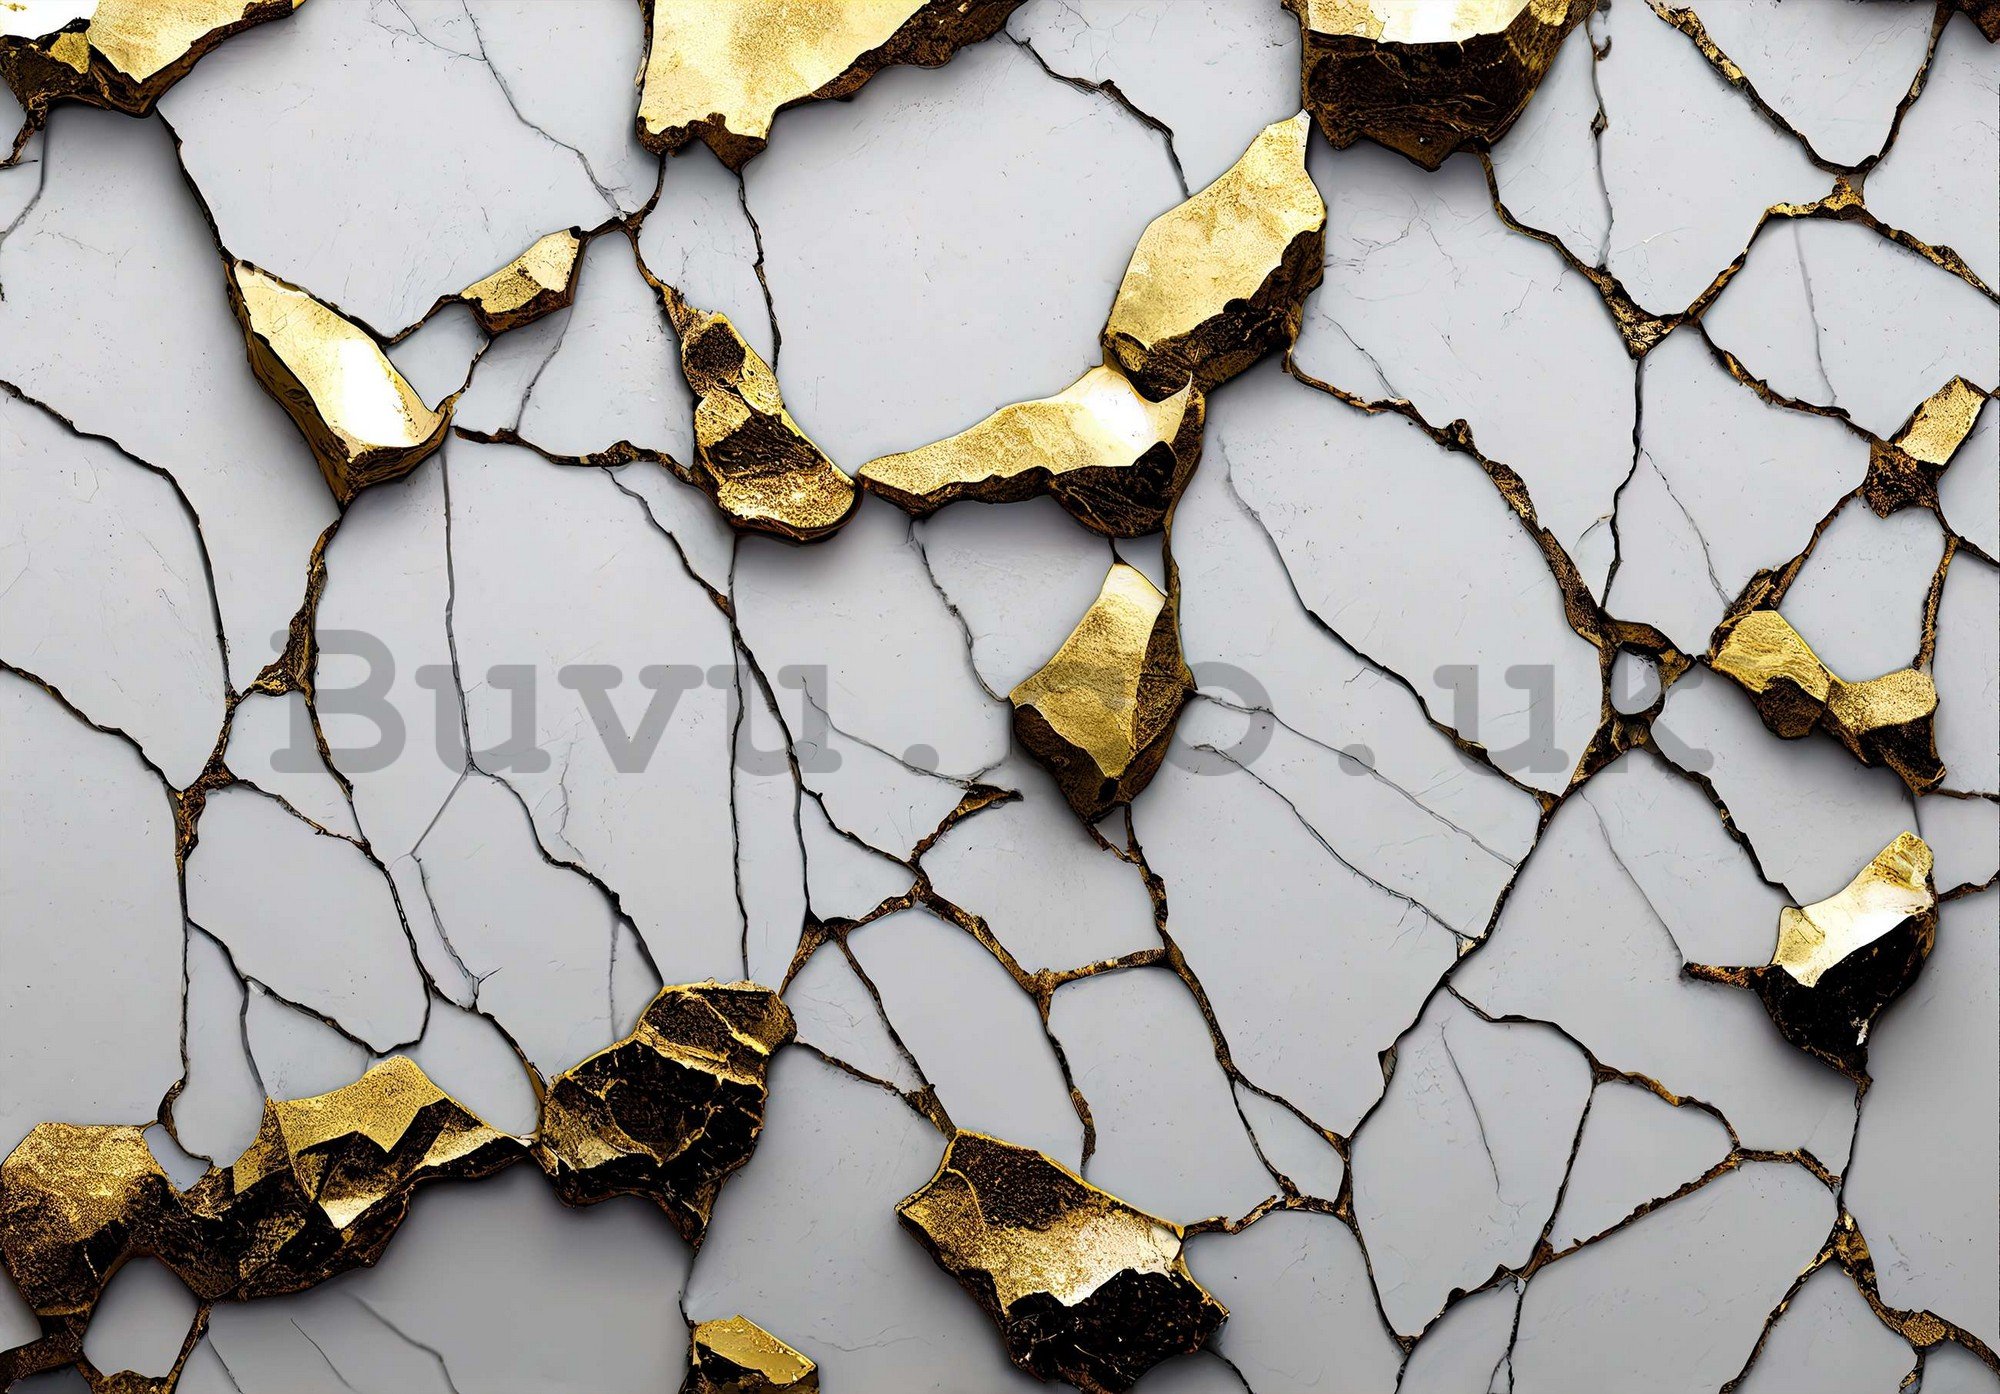 Wall mural vlies: Glamor imitation of golden marble with a white wall - 416x254 cm